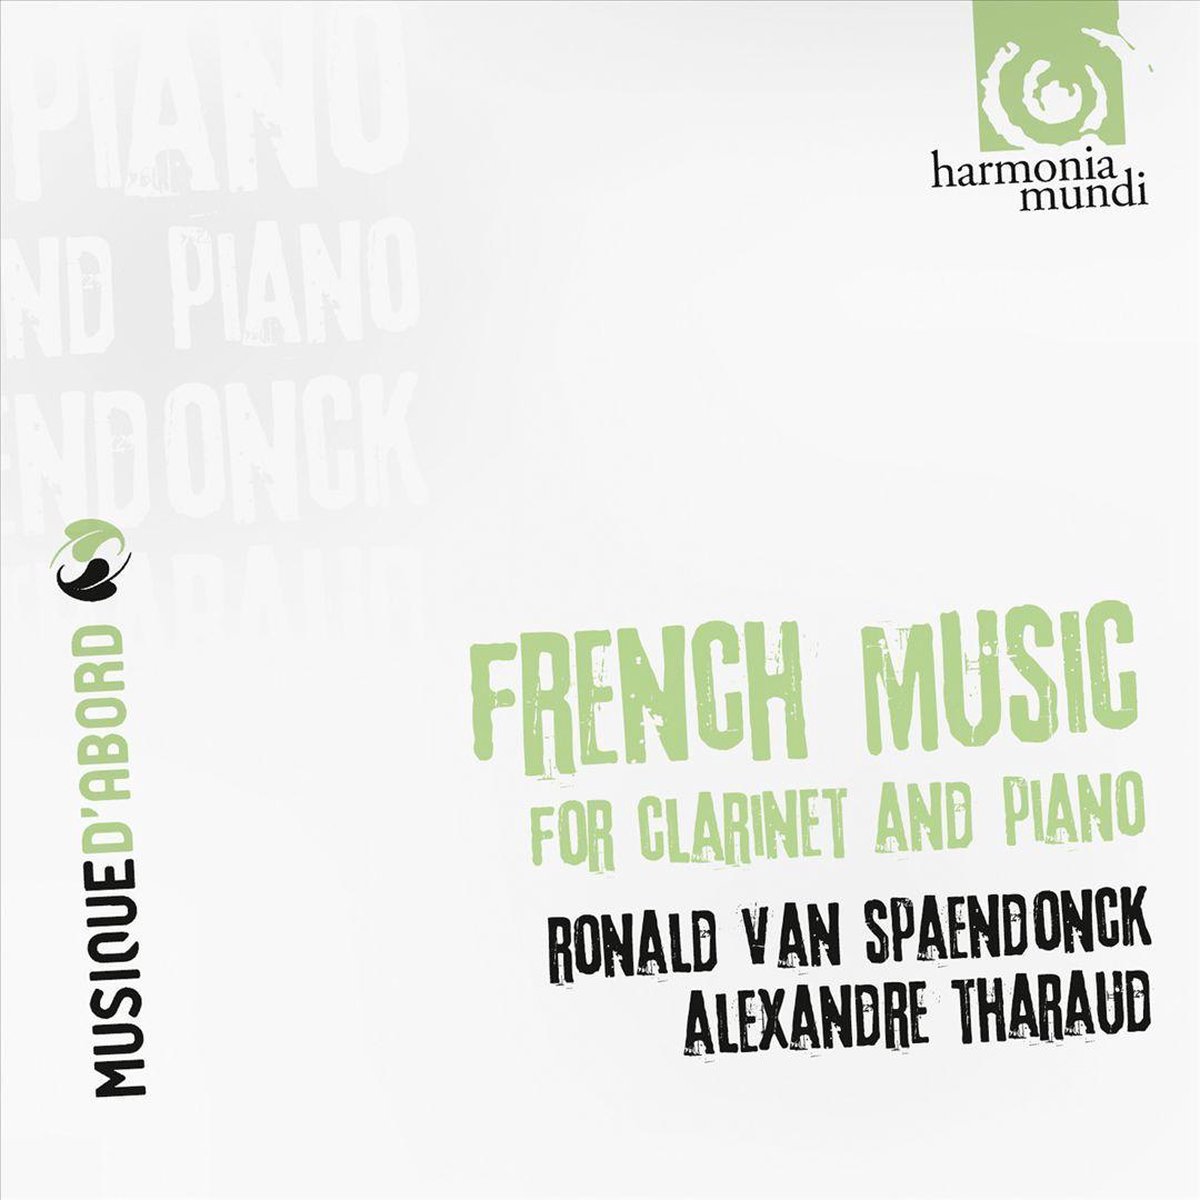 French Music for Clarinet and Piano | Ronald van Spaendonck, Alexandre Tharaud